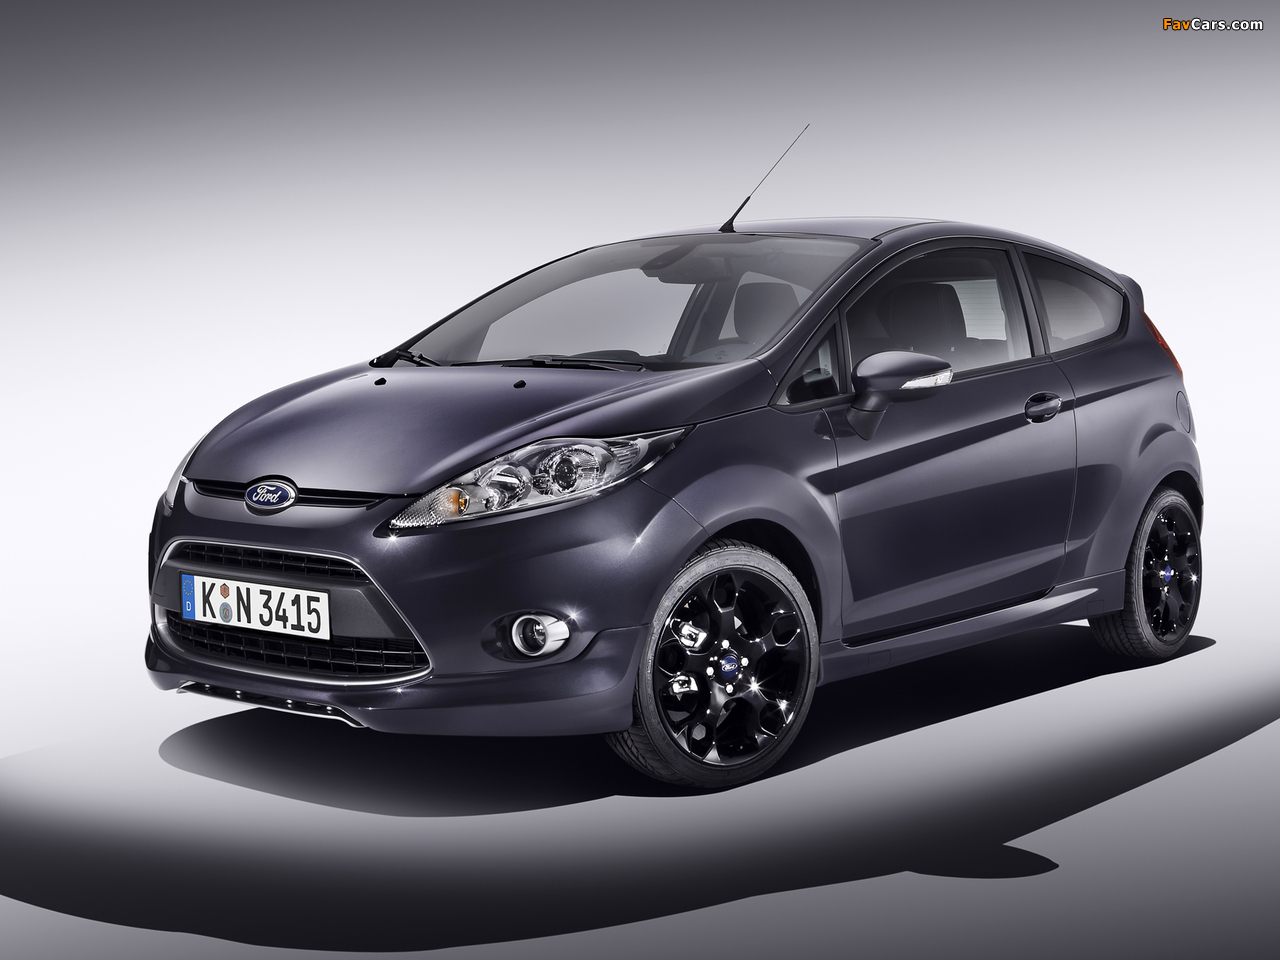 Ford Fiesta Sport Special Edition 2011 pictures (1280 x 960)